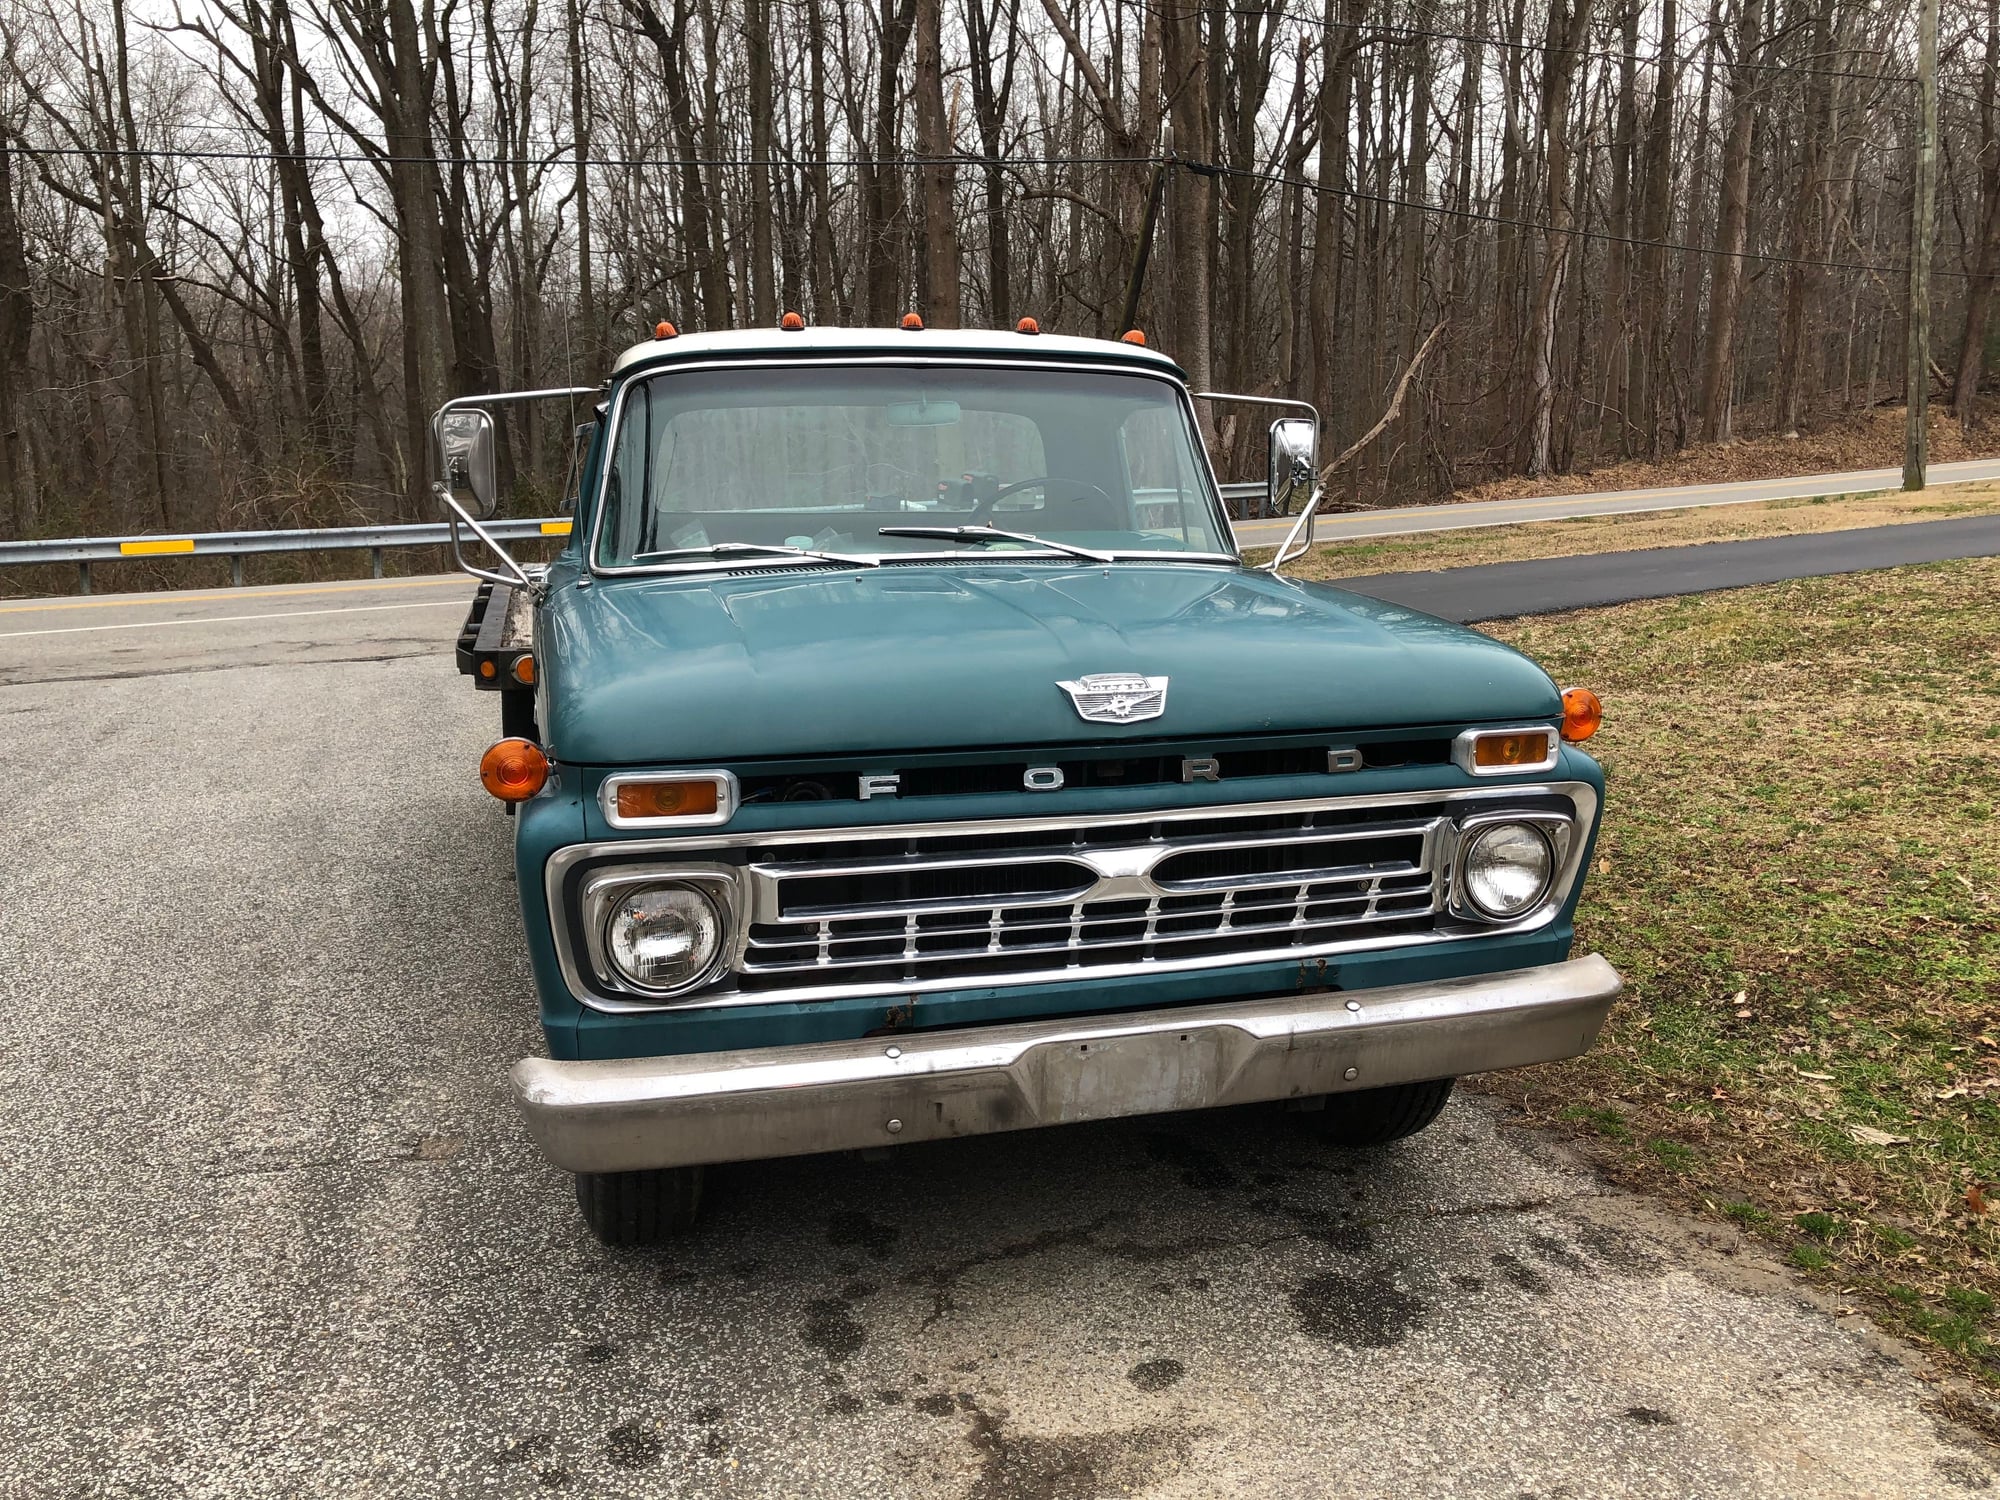 66 f350 - Ford Truck Enthusiasts Forums